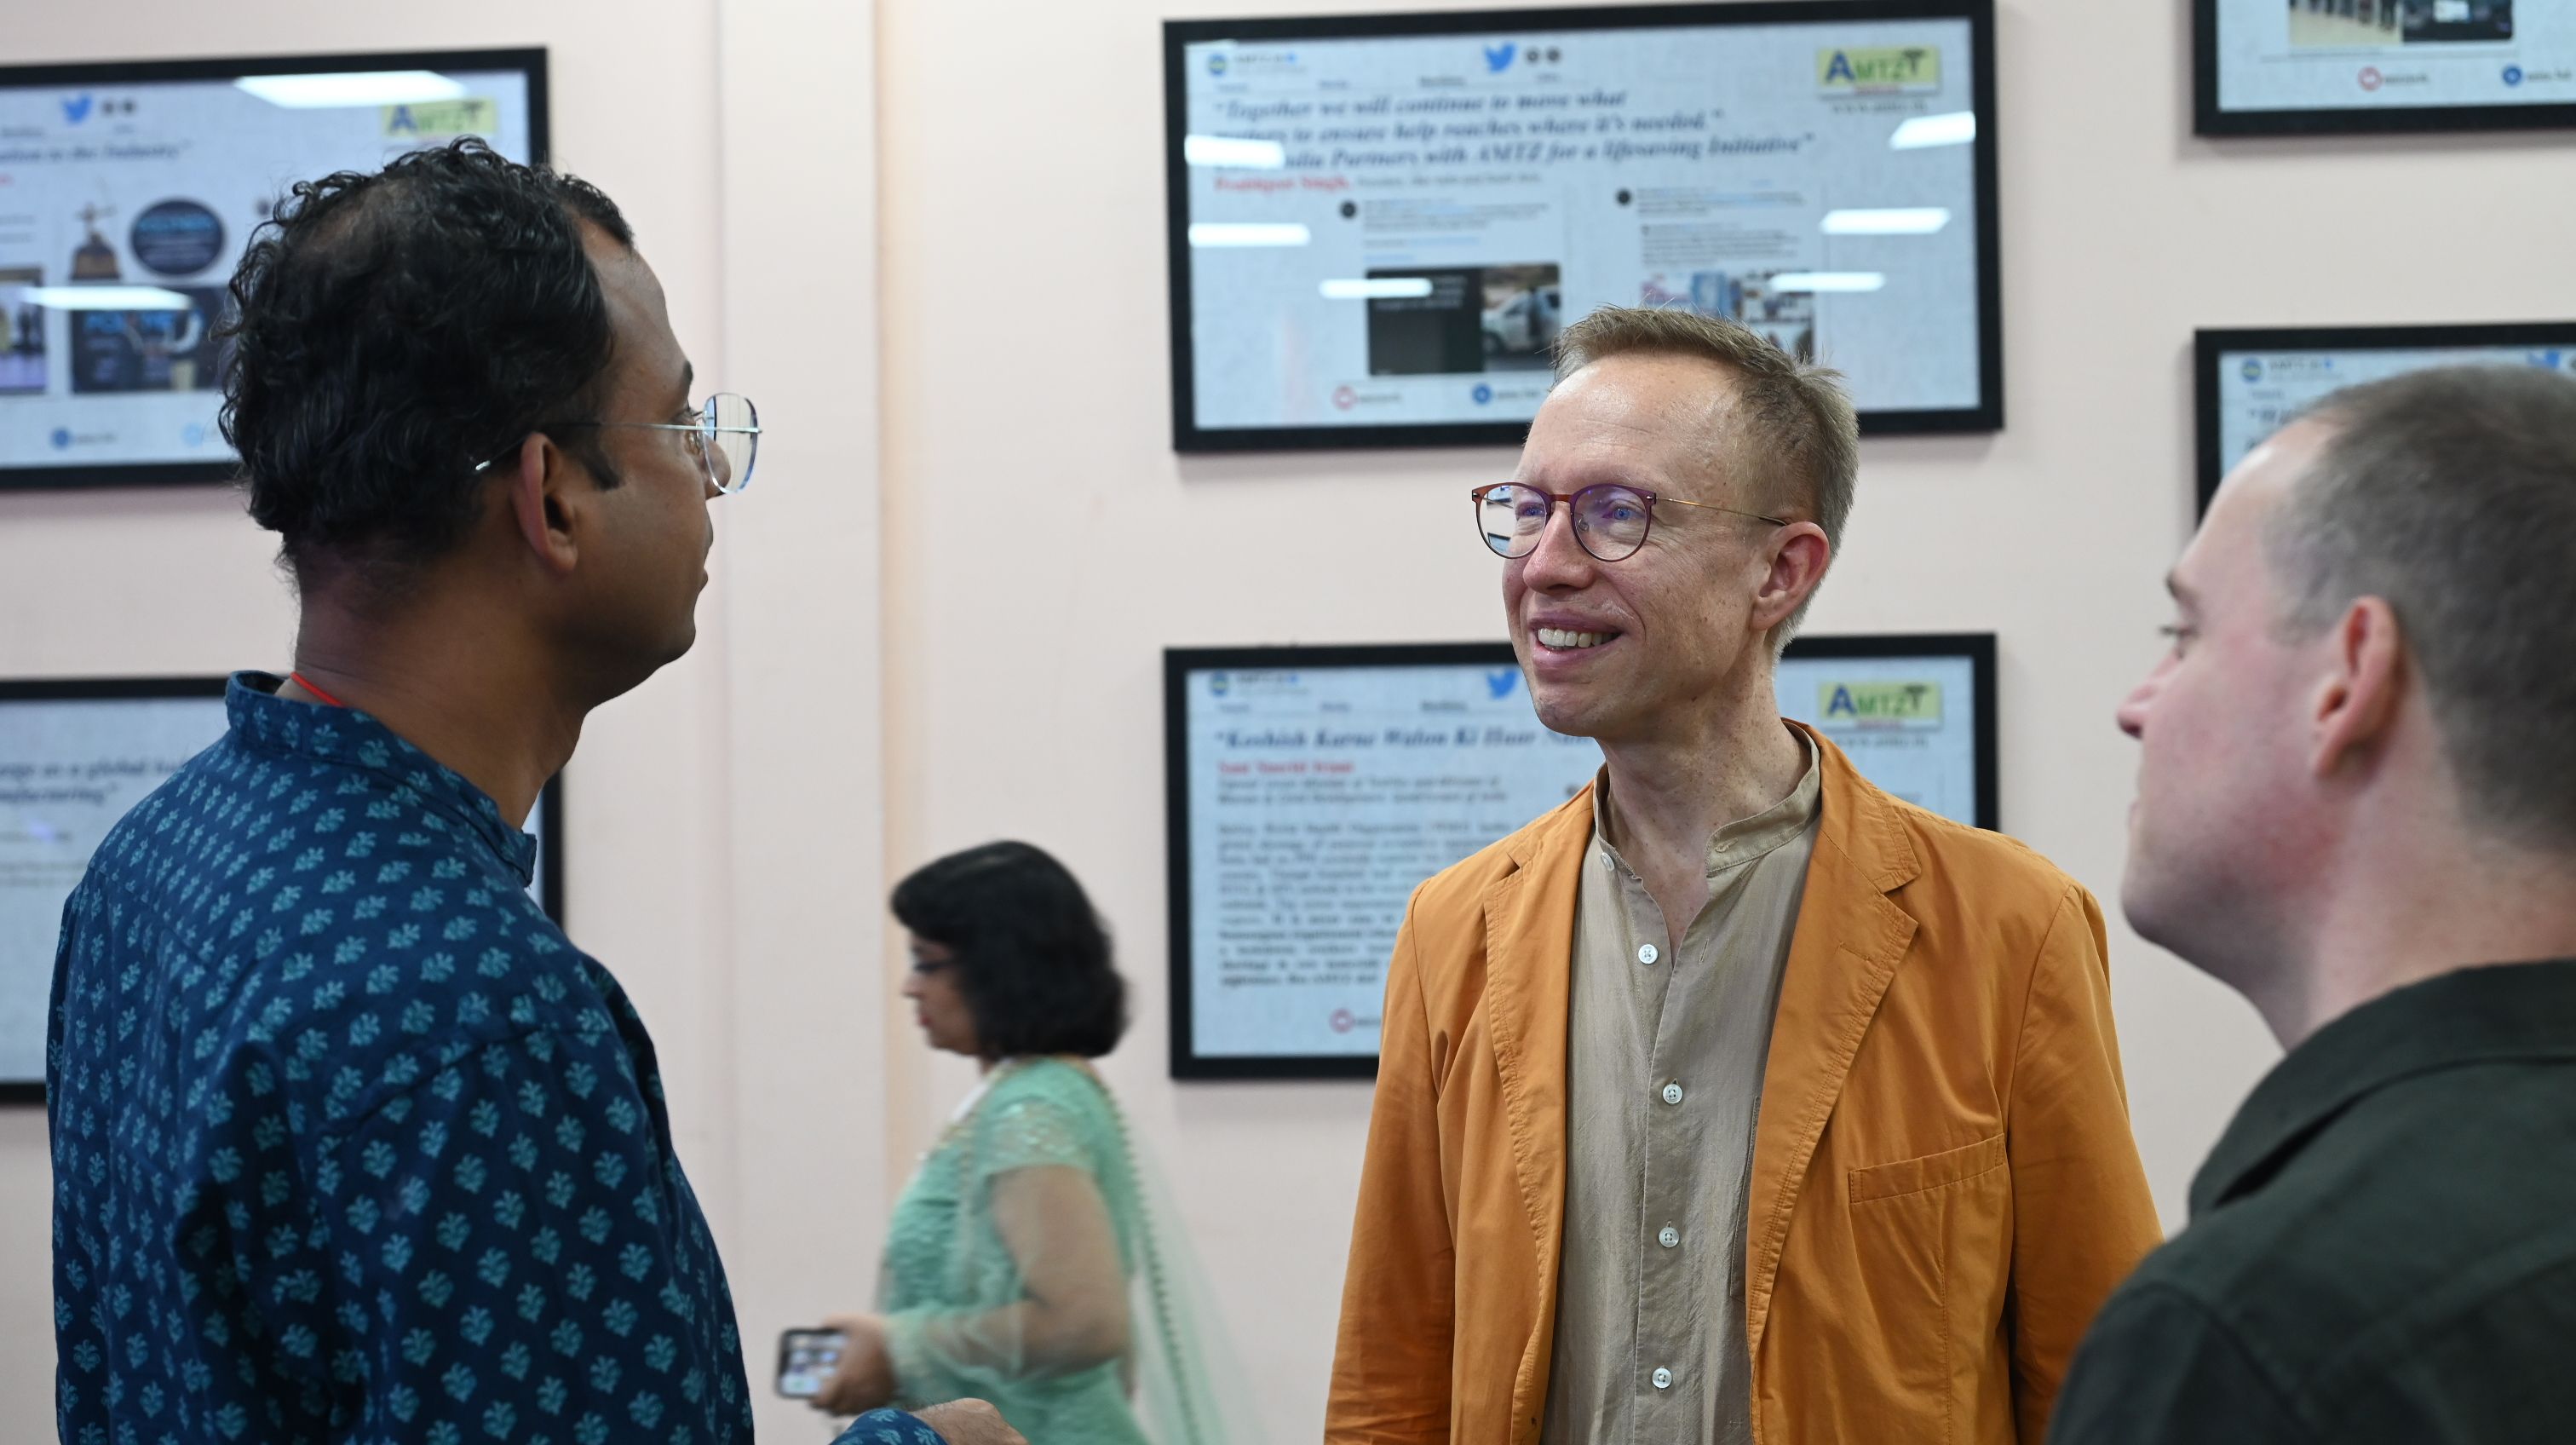 Professor Teun Zuiderent-Jerak from Vrije Universiteit, Amsterdam, collaborates with Dr. Jitendra Sharma at AMTZ to advance healthcare technology and MedTech in India